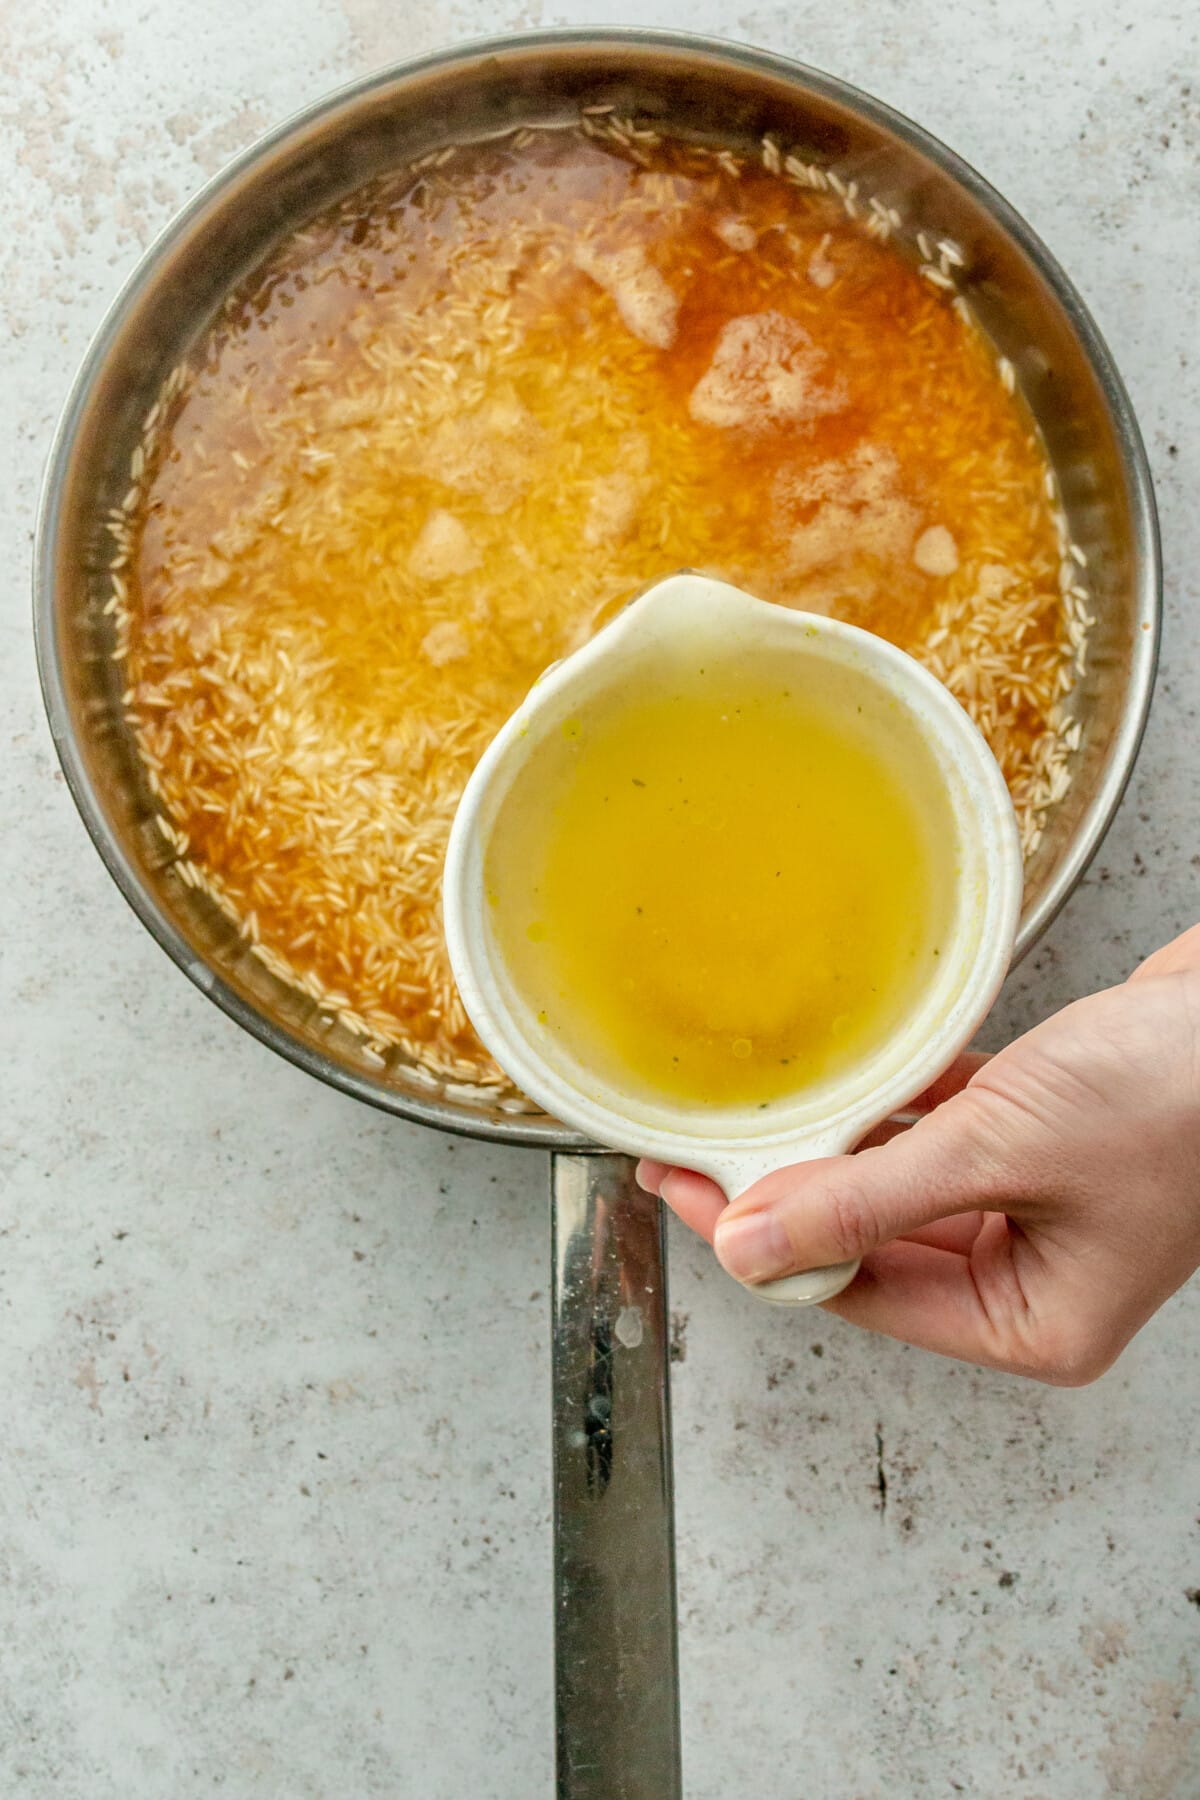 Chicken stock is poured over rice sitting in a stainless steel frying pan on a light grey surface.